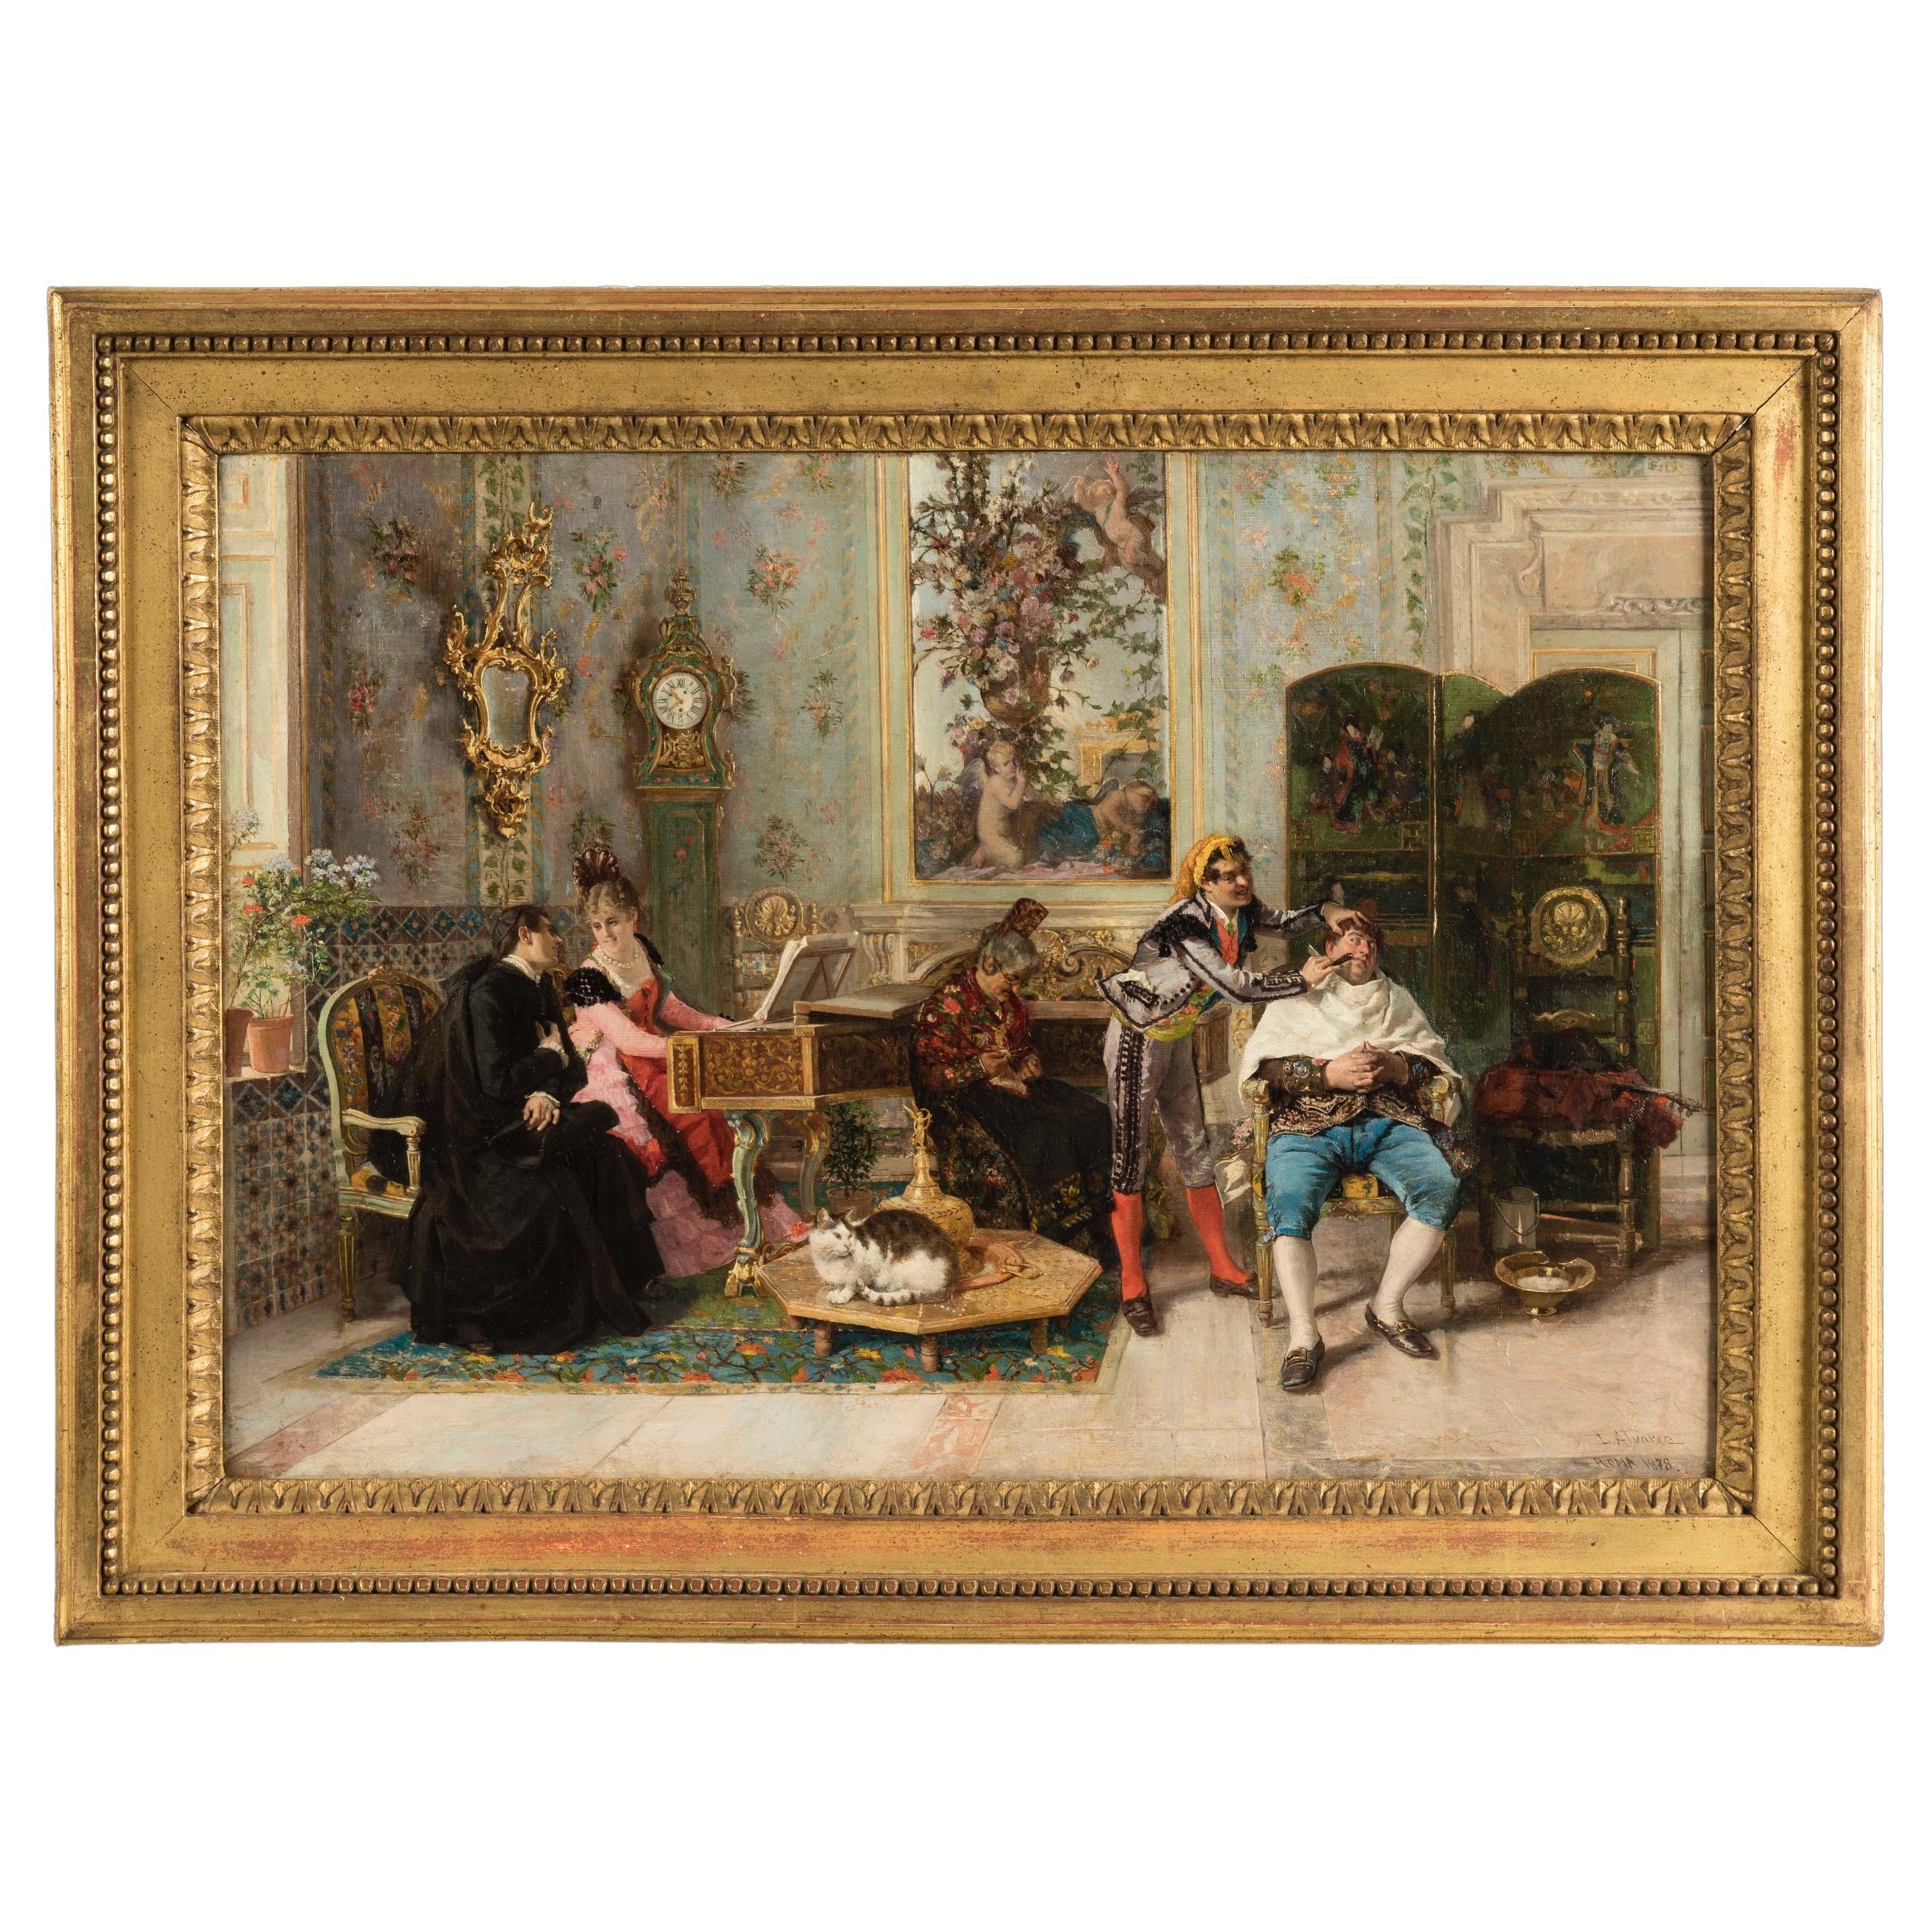 Oil on Canvas painting of 'The Barber of Seville' by Luis Alvarez Catalá